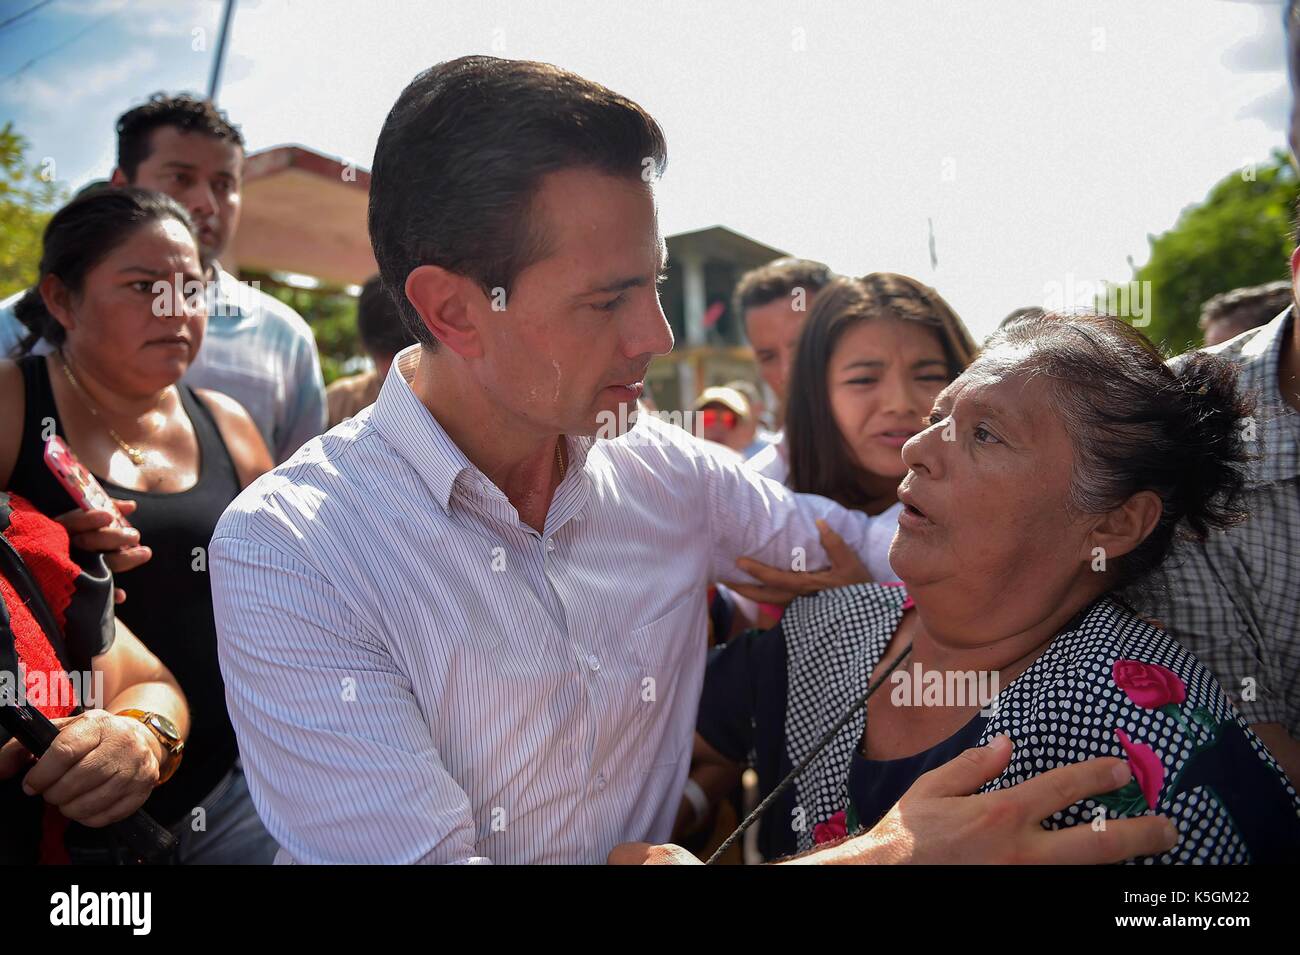 Oaxaca, Mexico. 09th Sep, 2017. Mexican President Enrique Pena Nieto comforts an earthquake survivor during a visit to the coastal town closest to the epicenter September 9, 2017 in Juchitán, Oaxaca, Mexico. The massive 8.2-magnitude quake struck off the southern Pacific coast of Chiapas killing at least 60 people and leveling areas in some southern states. (presidenciamx via Planetpix) Credit: Planetpix/Alamy Live News Stock Photo